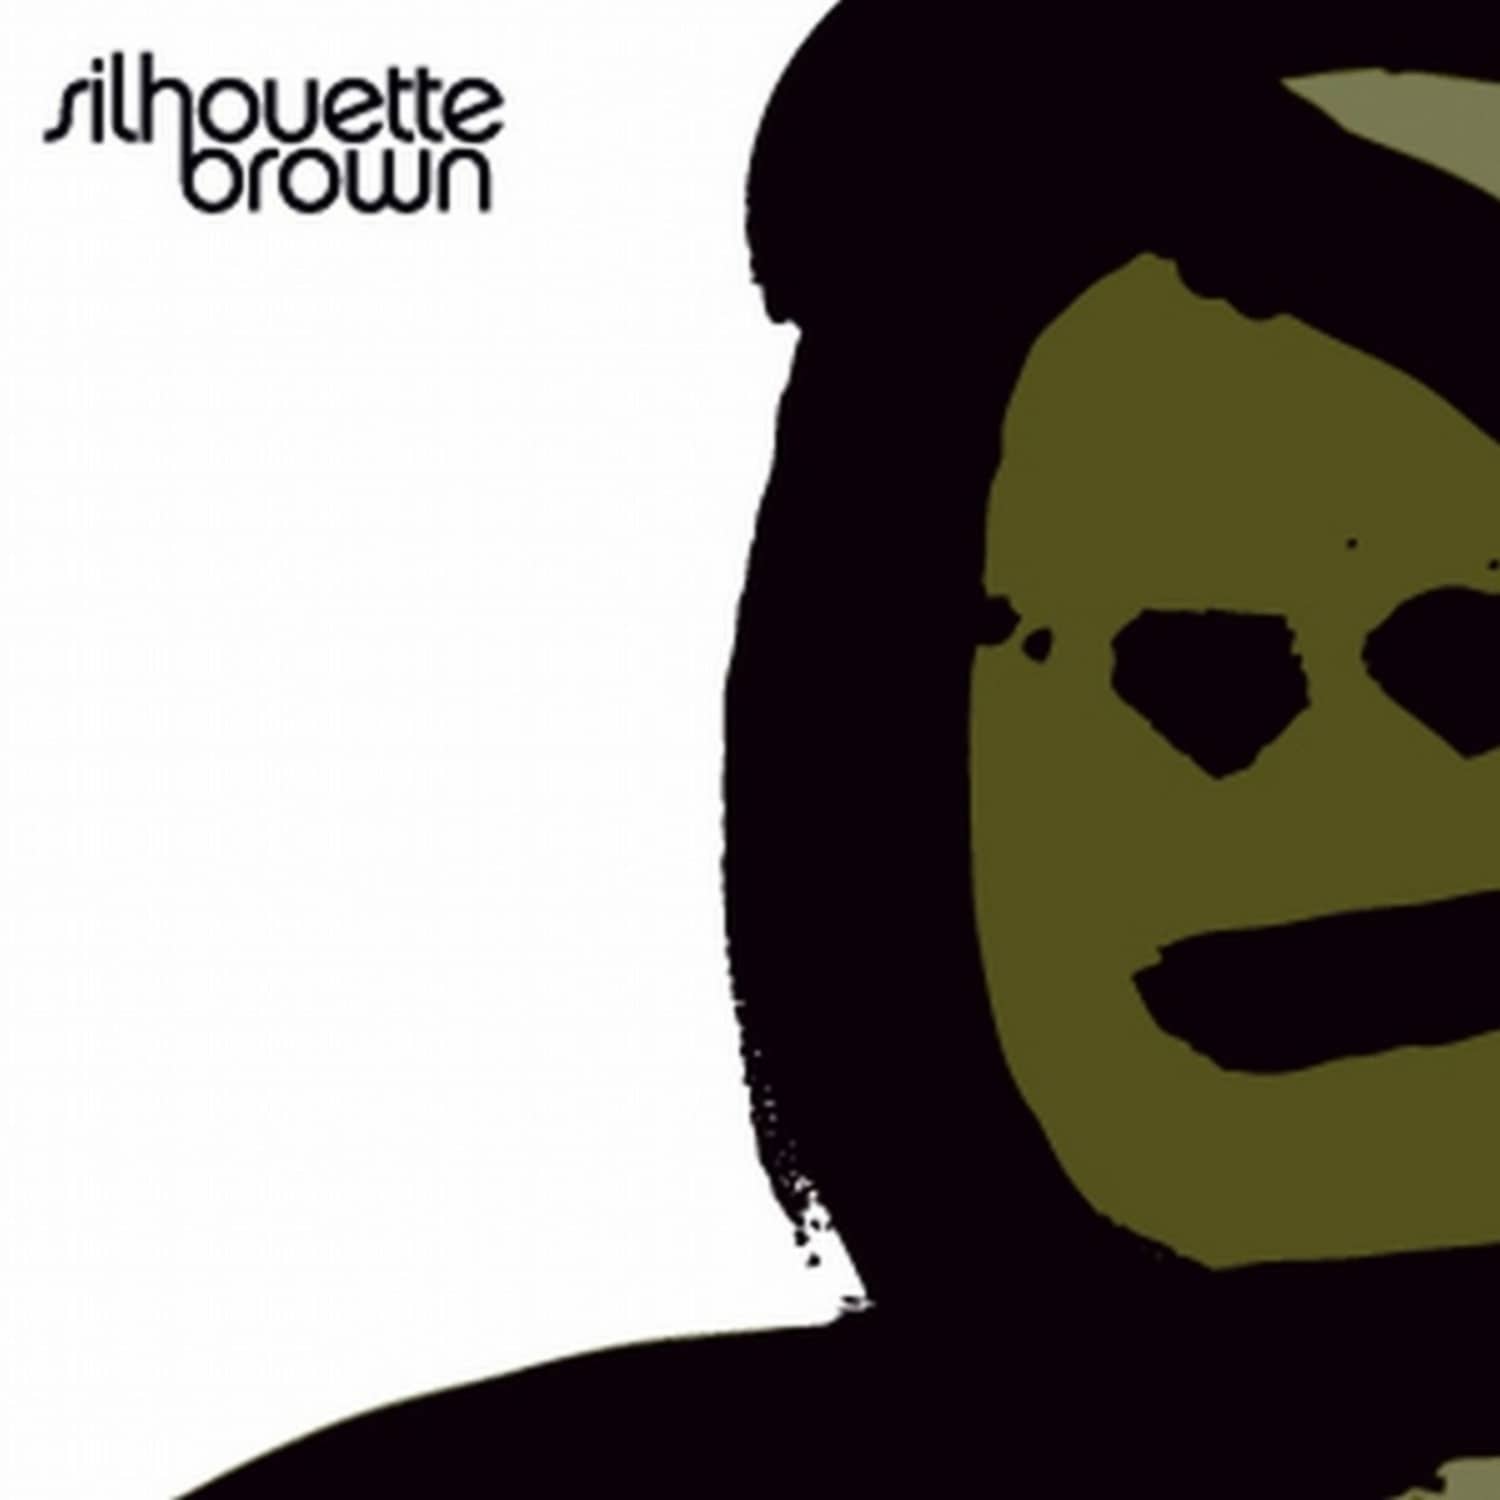 Silhouette Brown - SILHOUETTE BROWN 